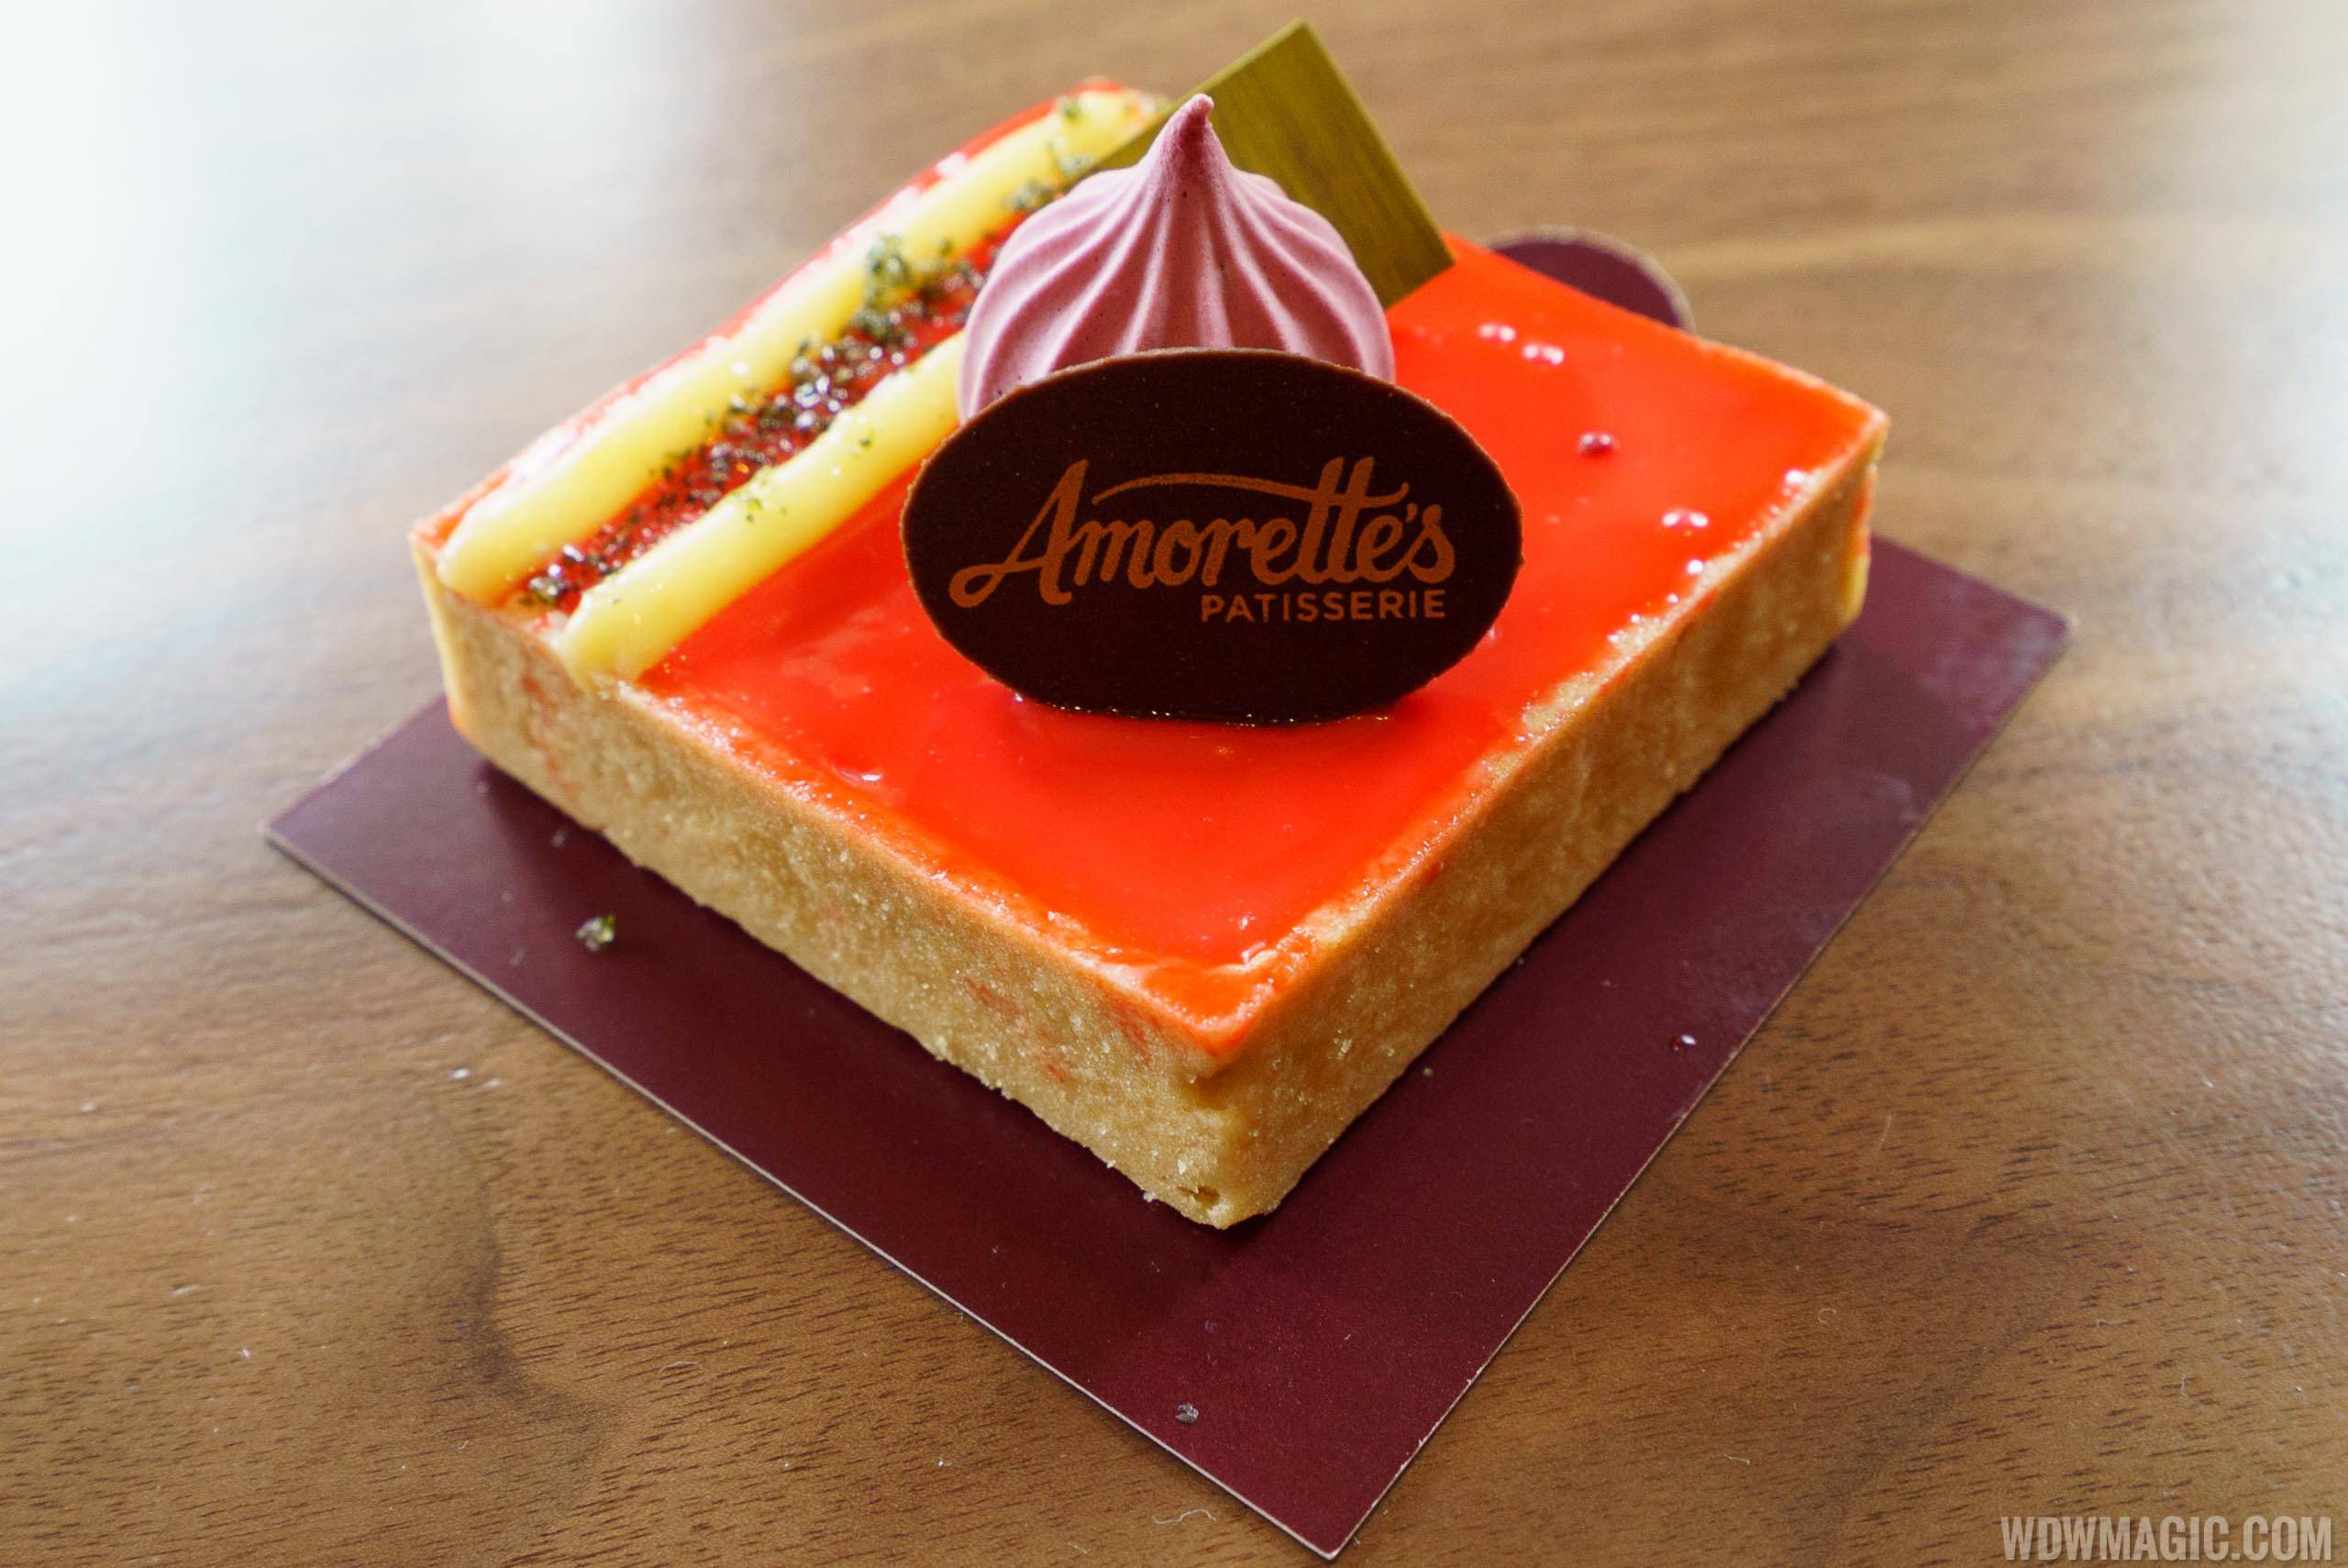 Amorette's Patisserie - Strawberry Fields of OC: Strawberry Mousse, Basil Sugar, and Lemon Curd